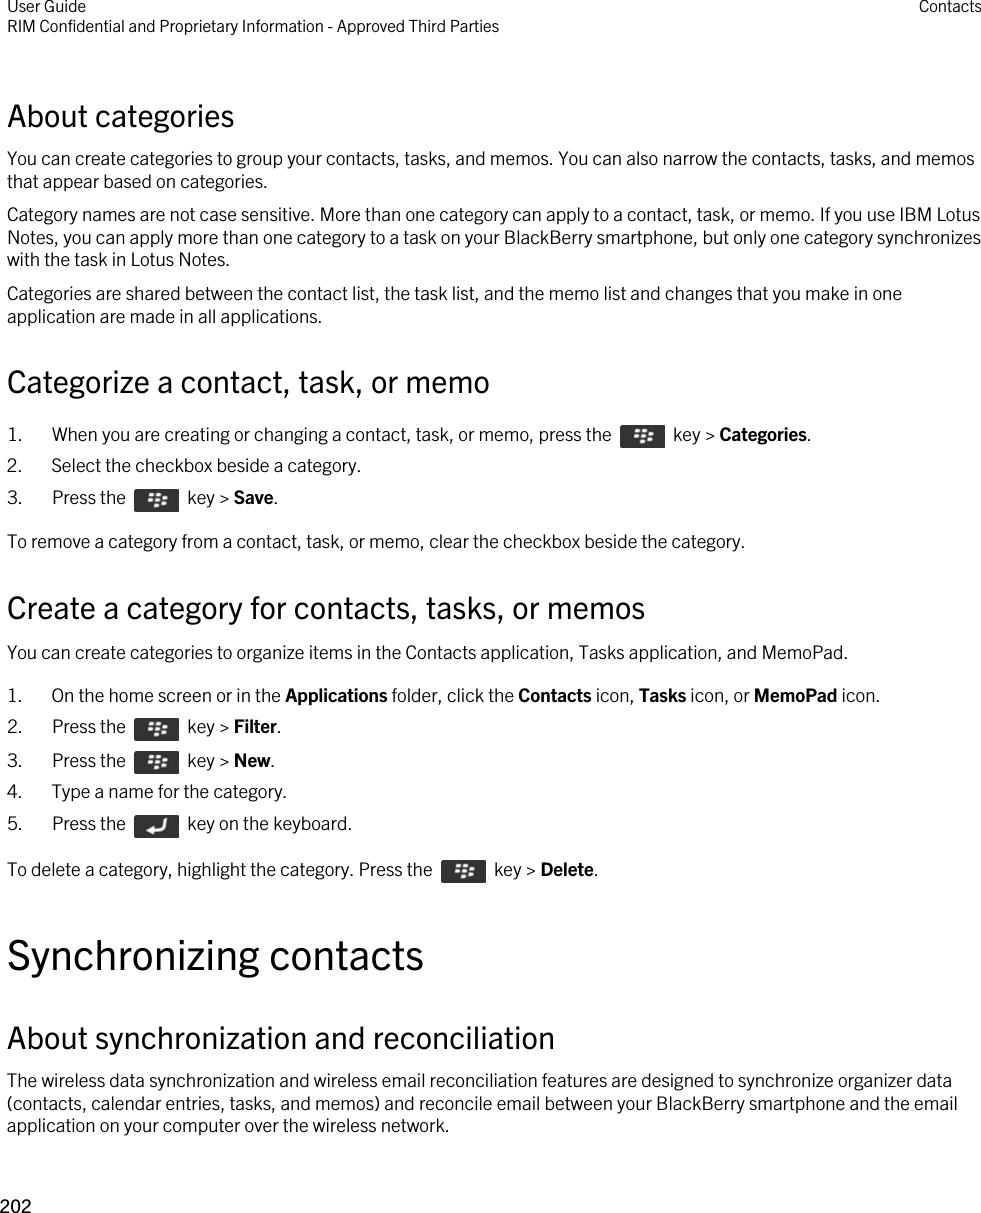 About categoriesYou can create categories to group your contacts, tasks, and memos. You can also narrow the contacts, tasks, and memos that appear based on categories.Category names are not case sensitive. More than one category can apply to a contact, task, or memo. If you use IBM Lotus Notes, you can apply more than one category to a task on your BlackBerry smartphone, but only one category synchronizes with the task in Lotus Notes.Categories are shared between the contact list, the task list, and the memo list and changes that you make in one application are made in all applications.Categorize a contact, task, or memo1.  When you are creating or changing a contact, task, or memo, press the    key &gt; Categories. 2. Select the checkbox beside a category.3.  Press the    key &gt; Save. To remove a category from a contact, task, or memo, clear the checkbox beside the category.Create a category for contacts, tasks, or memosYou can create categories to organize items in the Contacts application, Tasks application, and MemoPad.1. On the home screen or in the Applications folder, click the Contacts icon, Tasks icon, or MemoPad icon.2.  Press the    key &gt; Filter. 3.  Press the    key &gt; New. 4. Type a name for the category.5.  Press the    key on the keyboard. To delete a category, highlight the category. Press the    key &gt; Delete.Synchronizing contactsAbout synchronization and reconciliationThe wireless data synchronization and wireless email reconciliation features are designed to synchronize organizer data (contacts, calendar entries, tasks, and memos) and reconcile email between your BlackBerry smartphone and the email application on your computer over the wireless network.User GuideRIM Confidential and Proprietary Information - Approved Third Parties Contacts202 